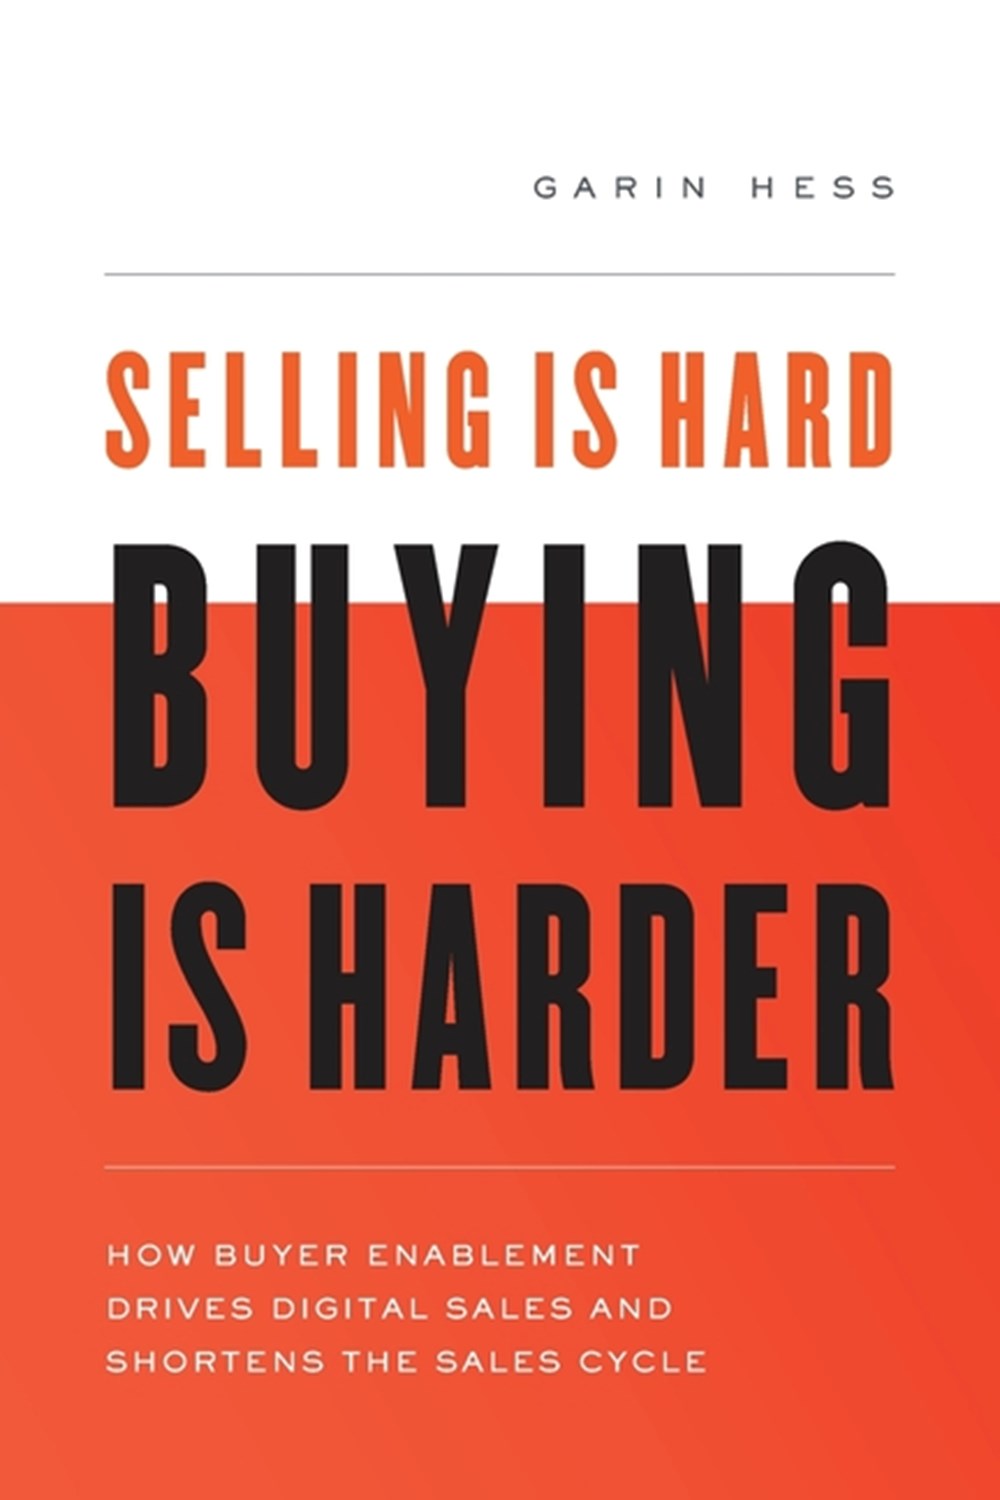 Selling Is Hard. Buying Is Harder.: How Buyer Enablement Drives Digital Sales and Shortens the Sales